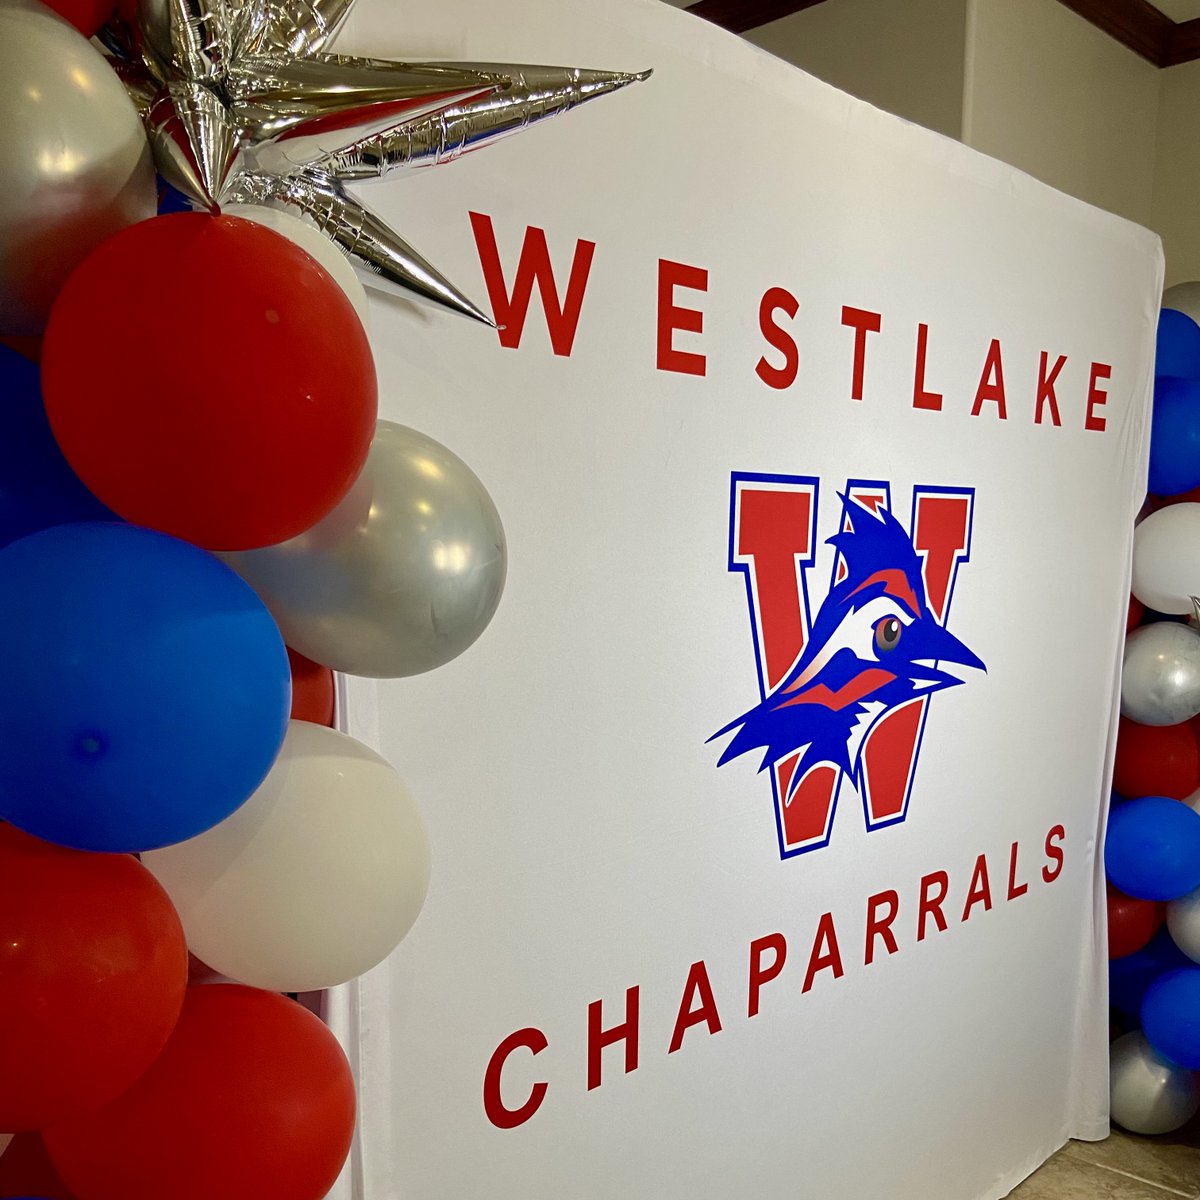 Tis the season for end-of-year banquets @EanesISD. While I can't get to them all, Monday evening I made it to the dinner that celebrated a great turnaround @whschapsoccer. Congrats to the boys, their coaches and parents for scoring a winning culture @Westlake_Nation and @WHSChaps